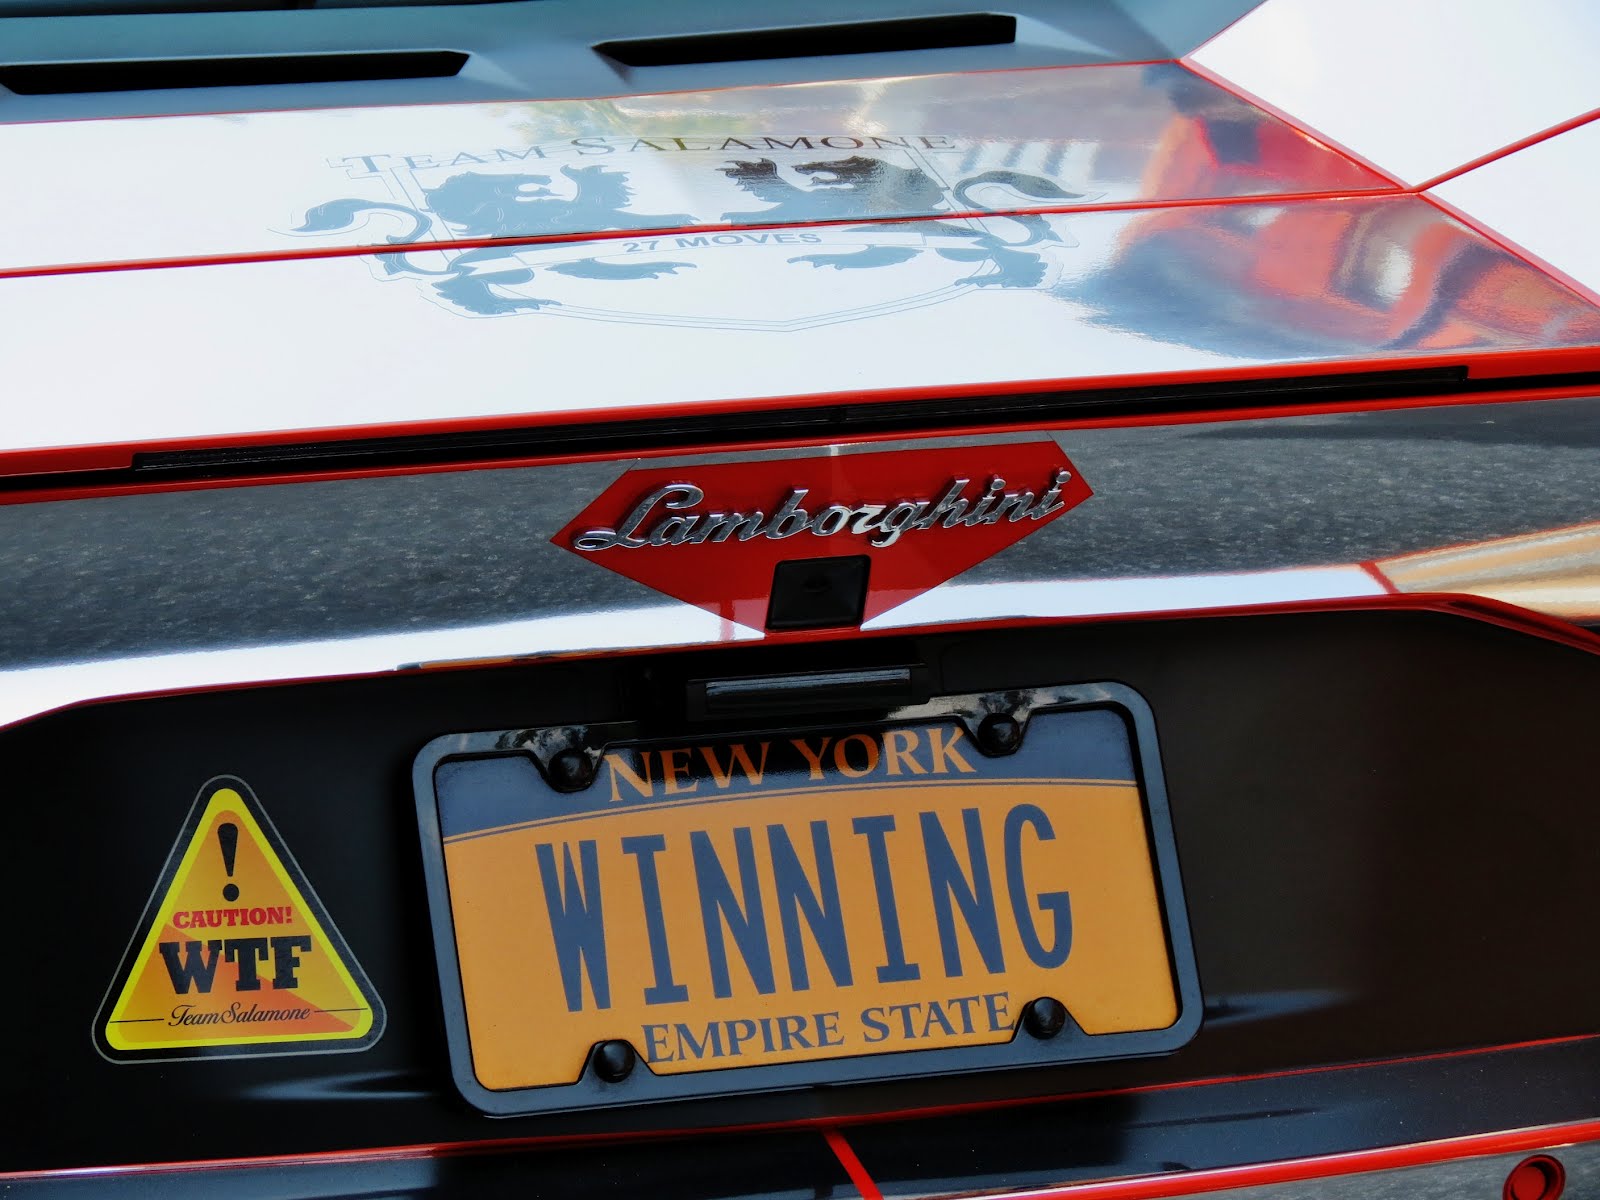 Today in photos of a Lamborghini with a 'WINNING' license plate o...